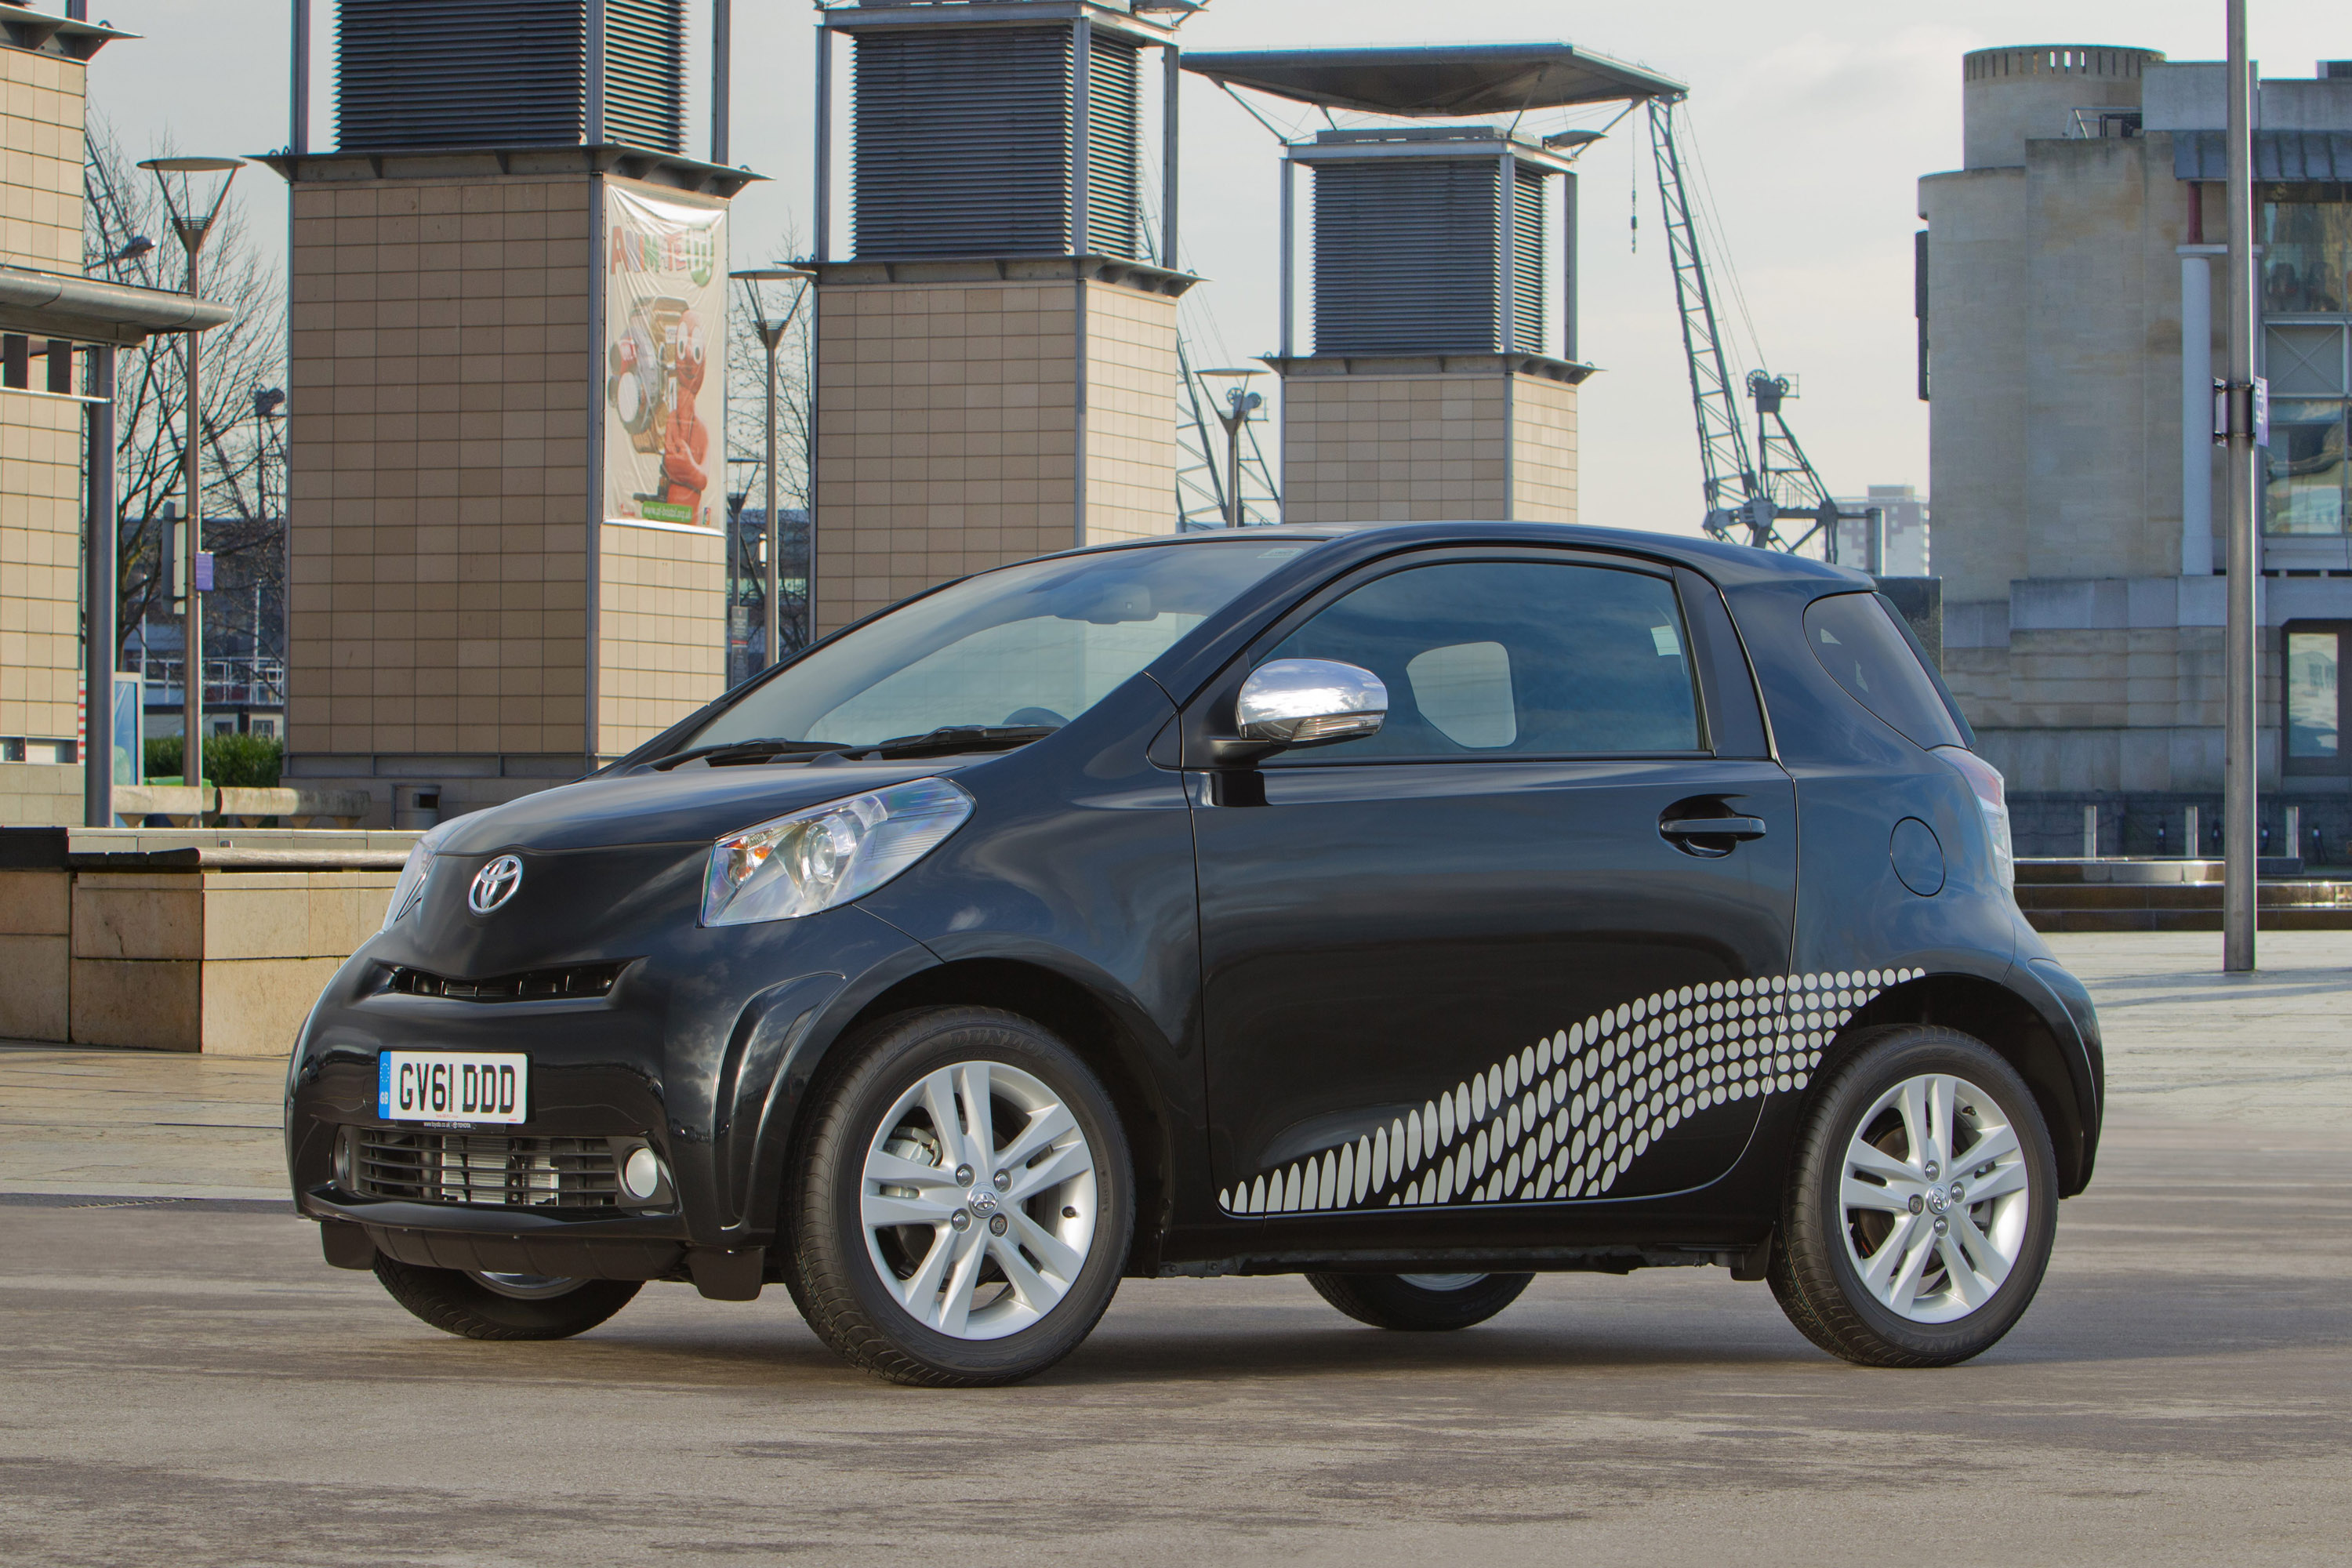 Toyota iQ - Customised Clever Cars